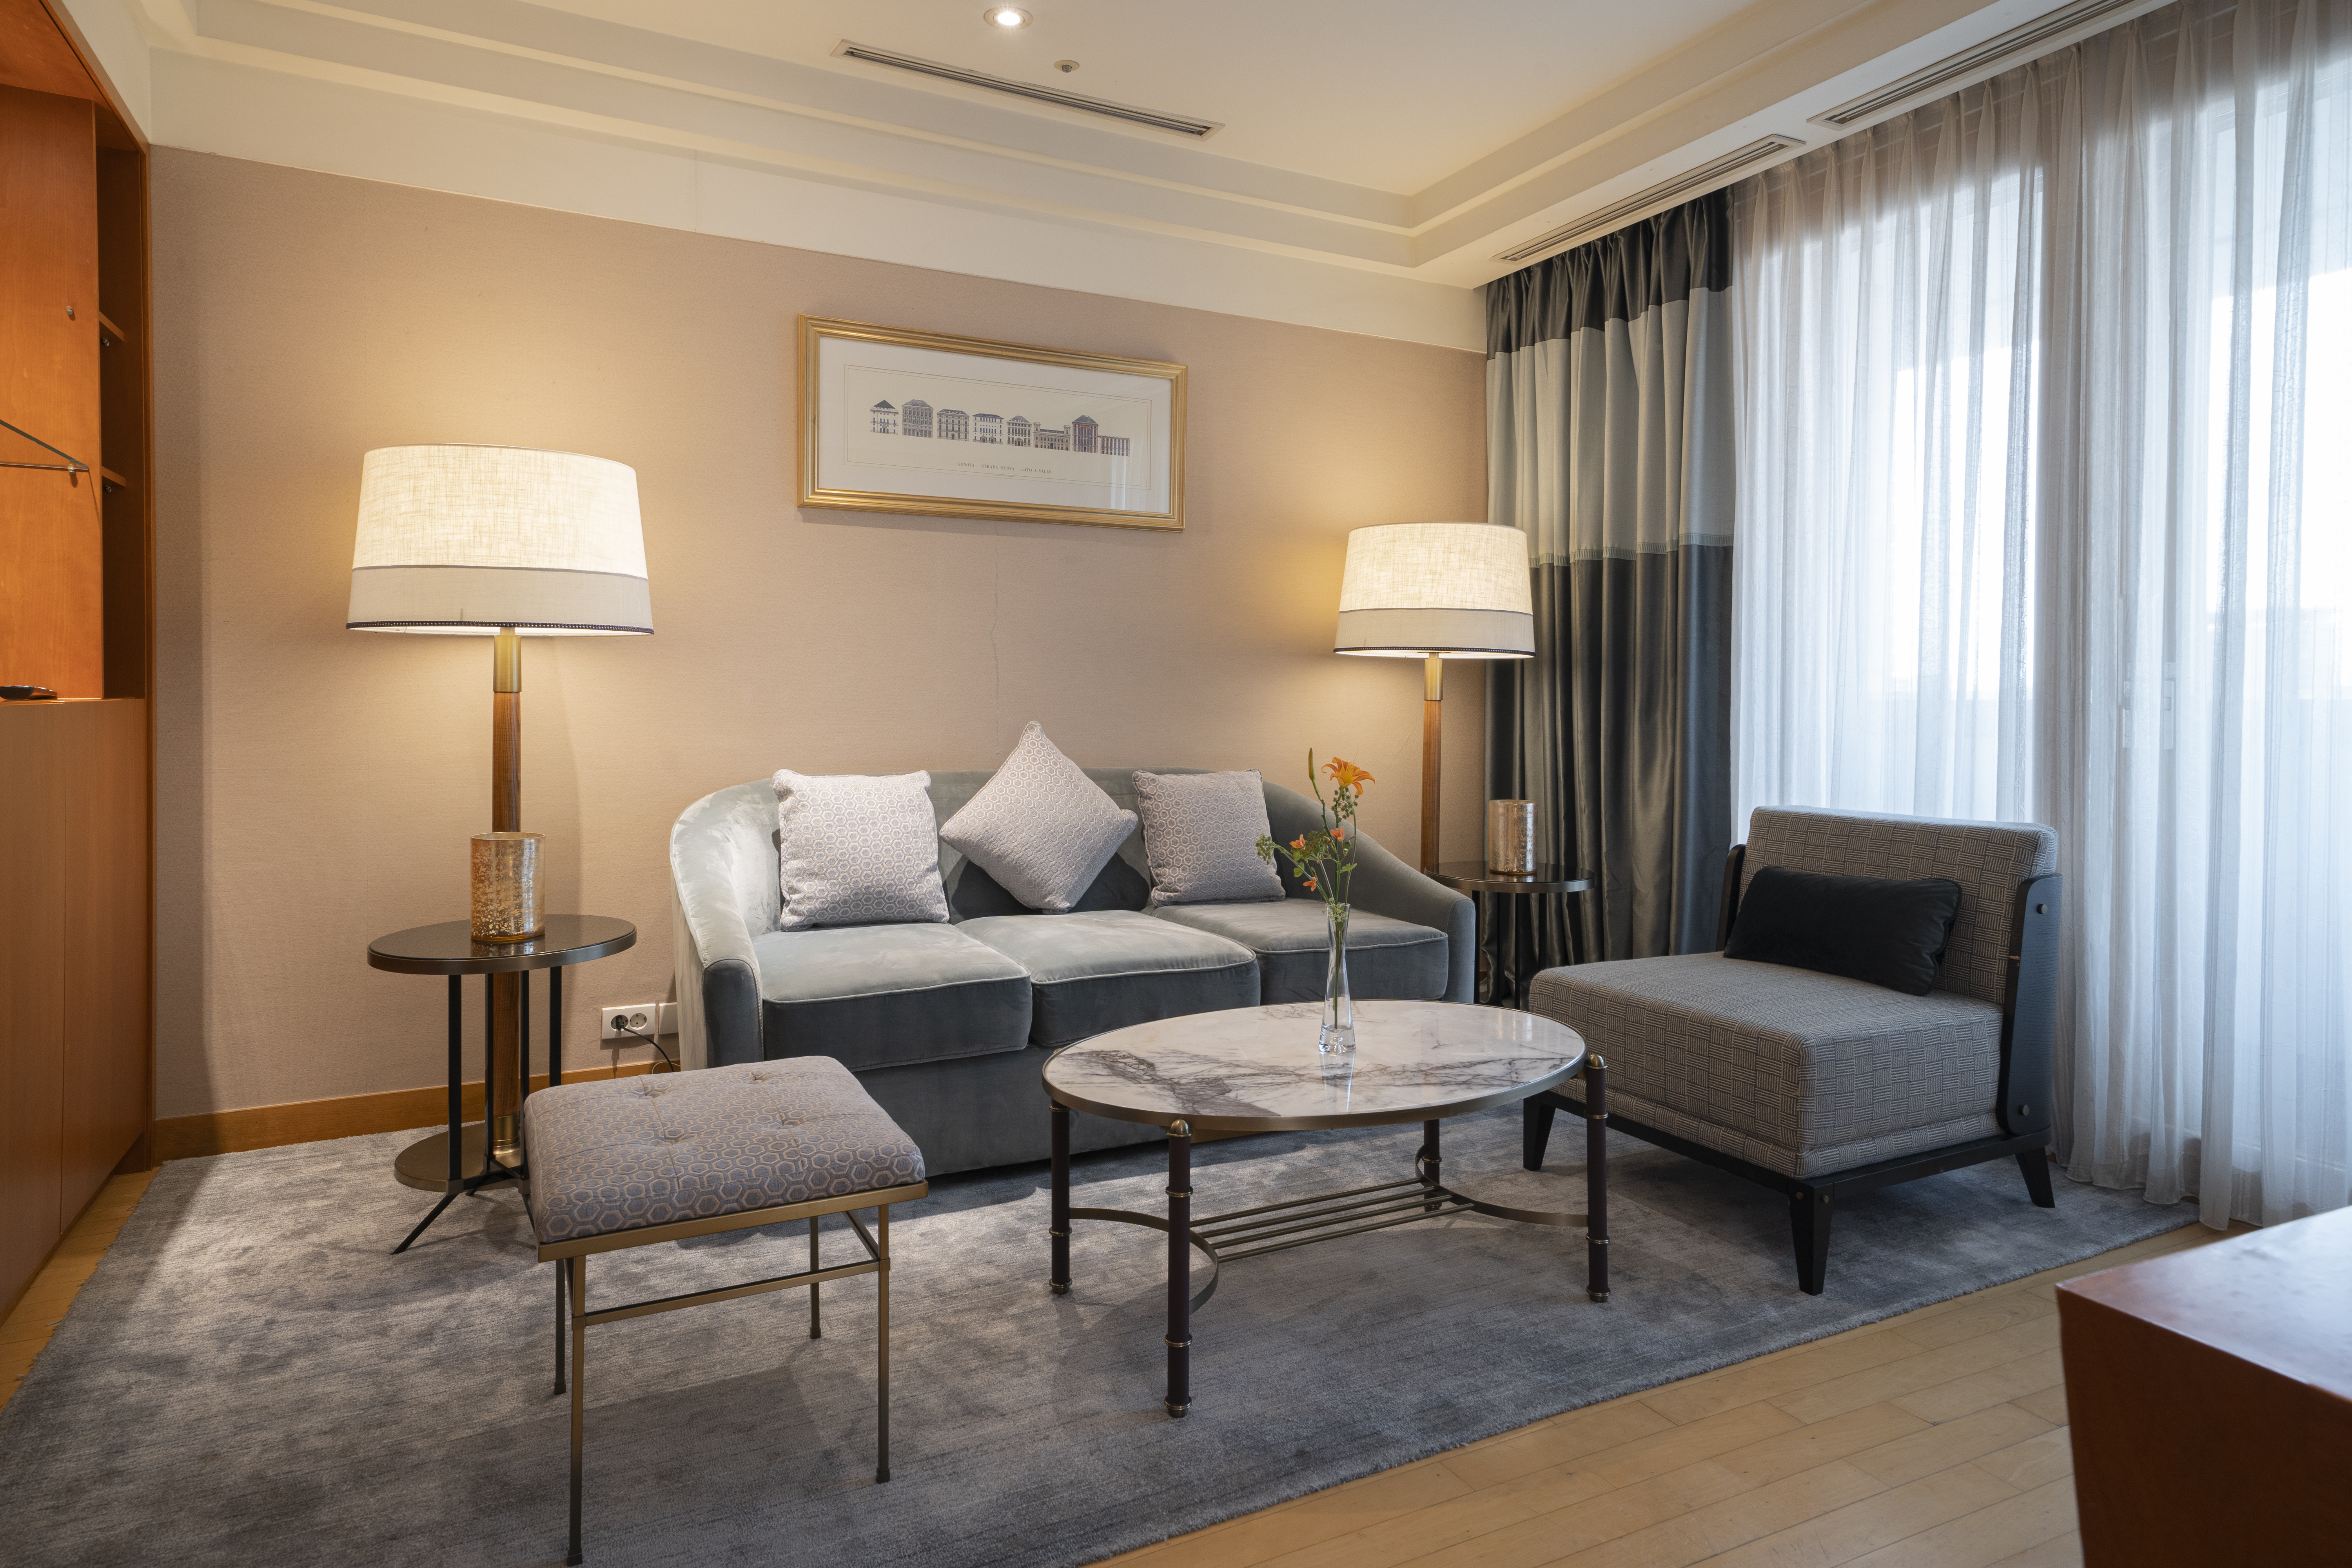 Mayfield Hotel3 : A stylish and elegant guest room with a sofa in the middle